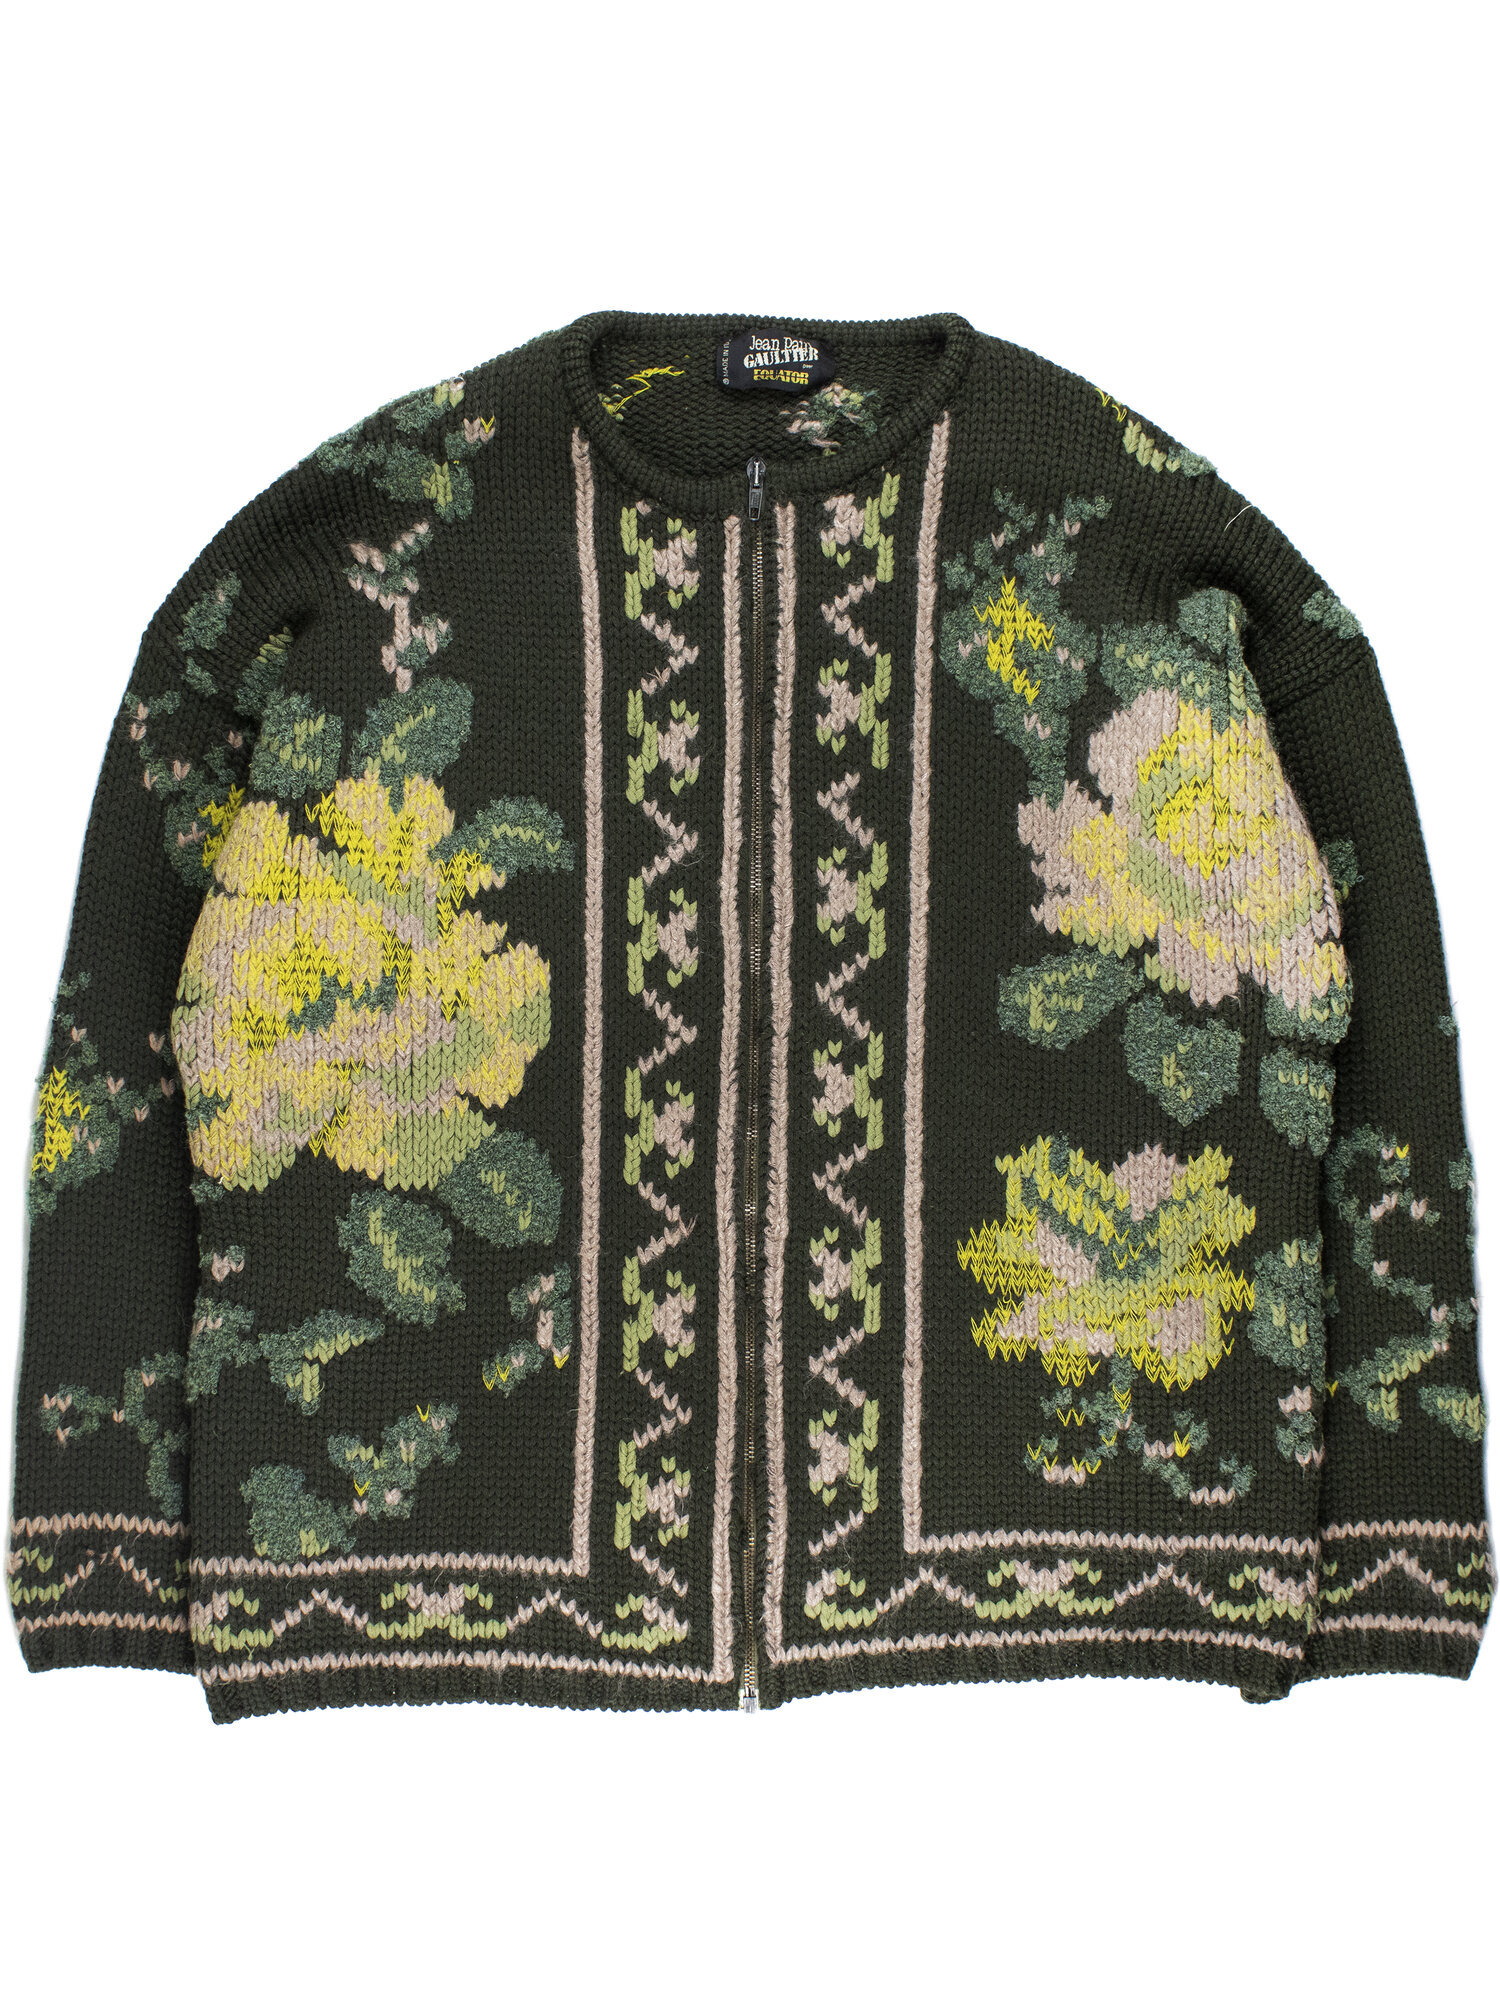 Jean Paul Gaultier AW1984 Floral Cardigan — Middleman Store